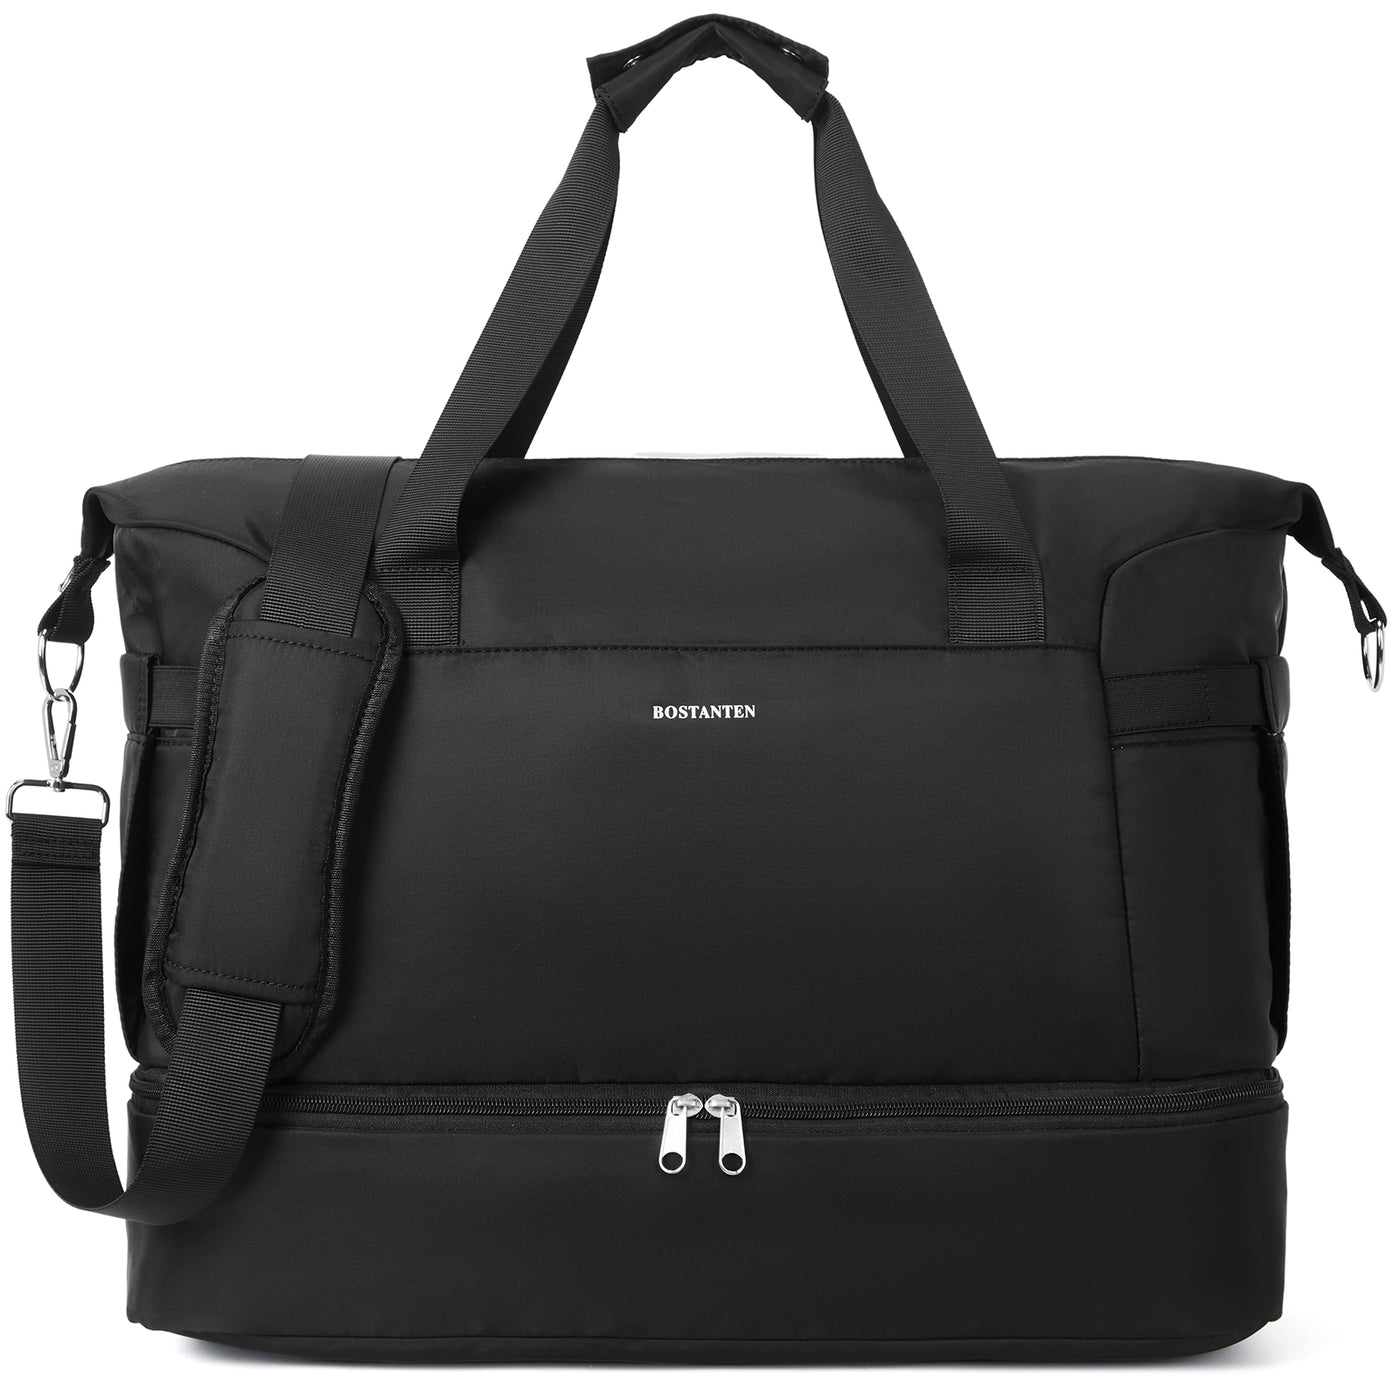 Judea Lightweight Weekender Bag with Shoe Compartment